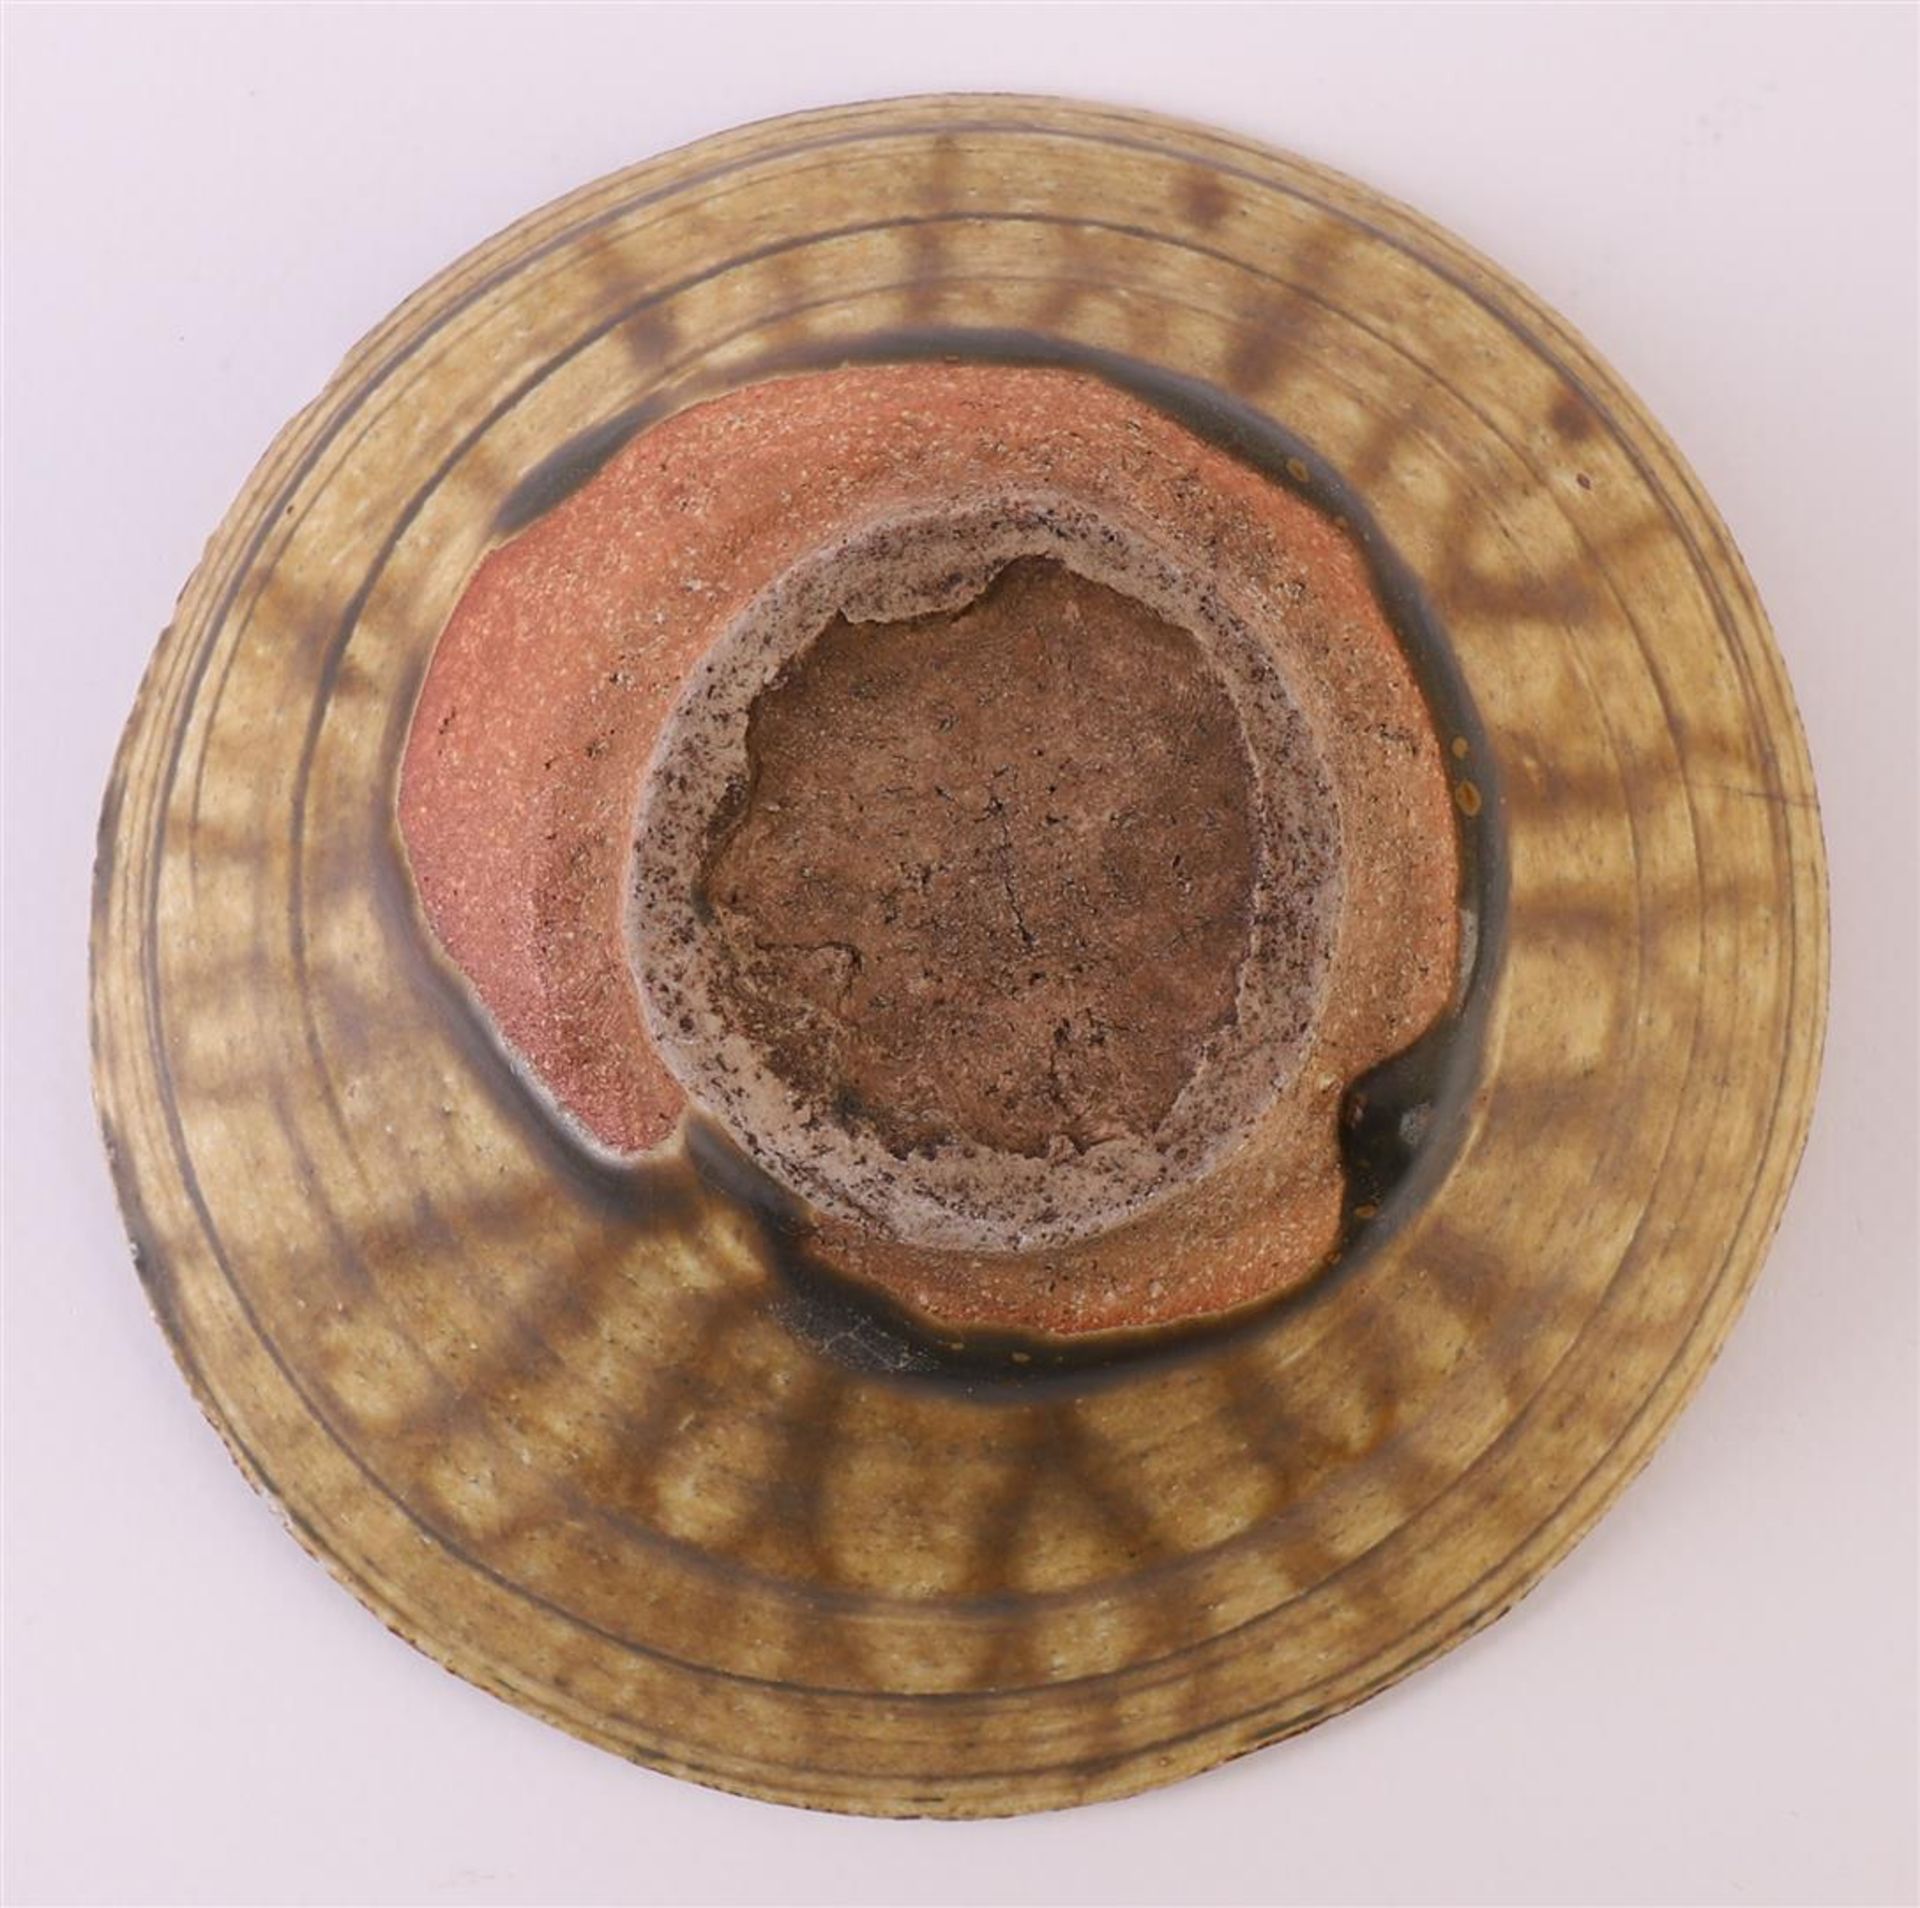 A brown glazed earthenware conical Temmoku bowl, China, Song dynasty - Image 7 of 8